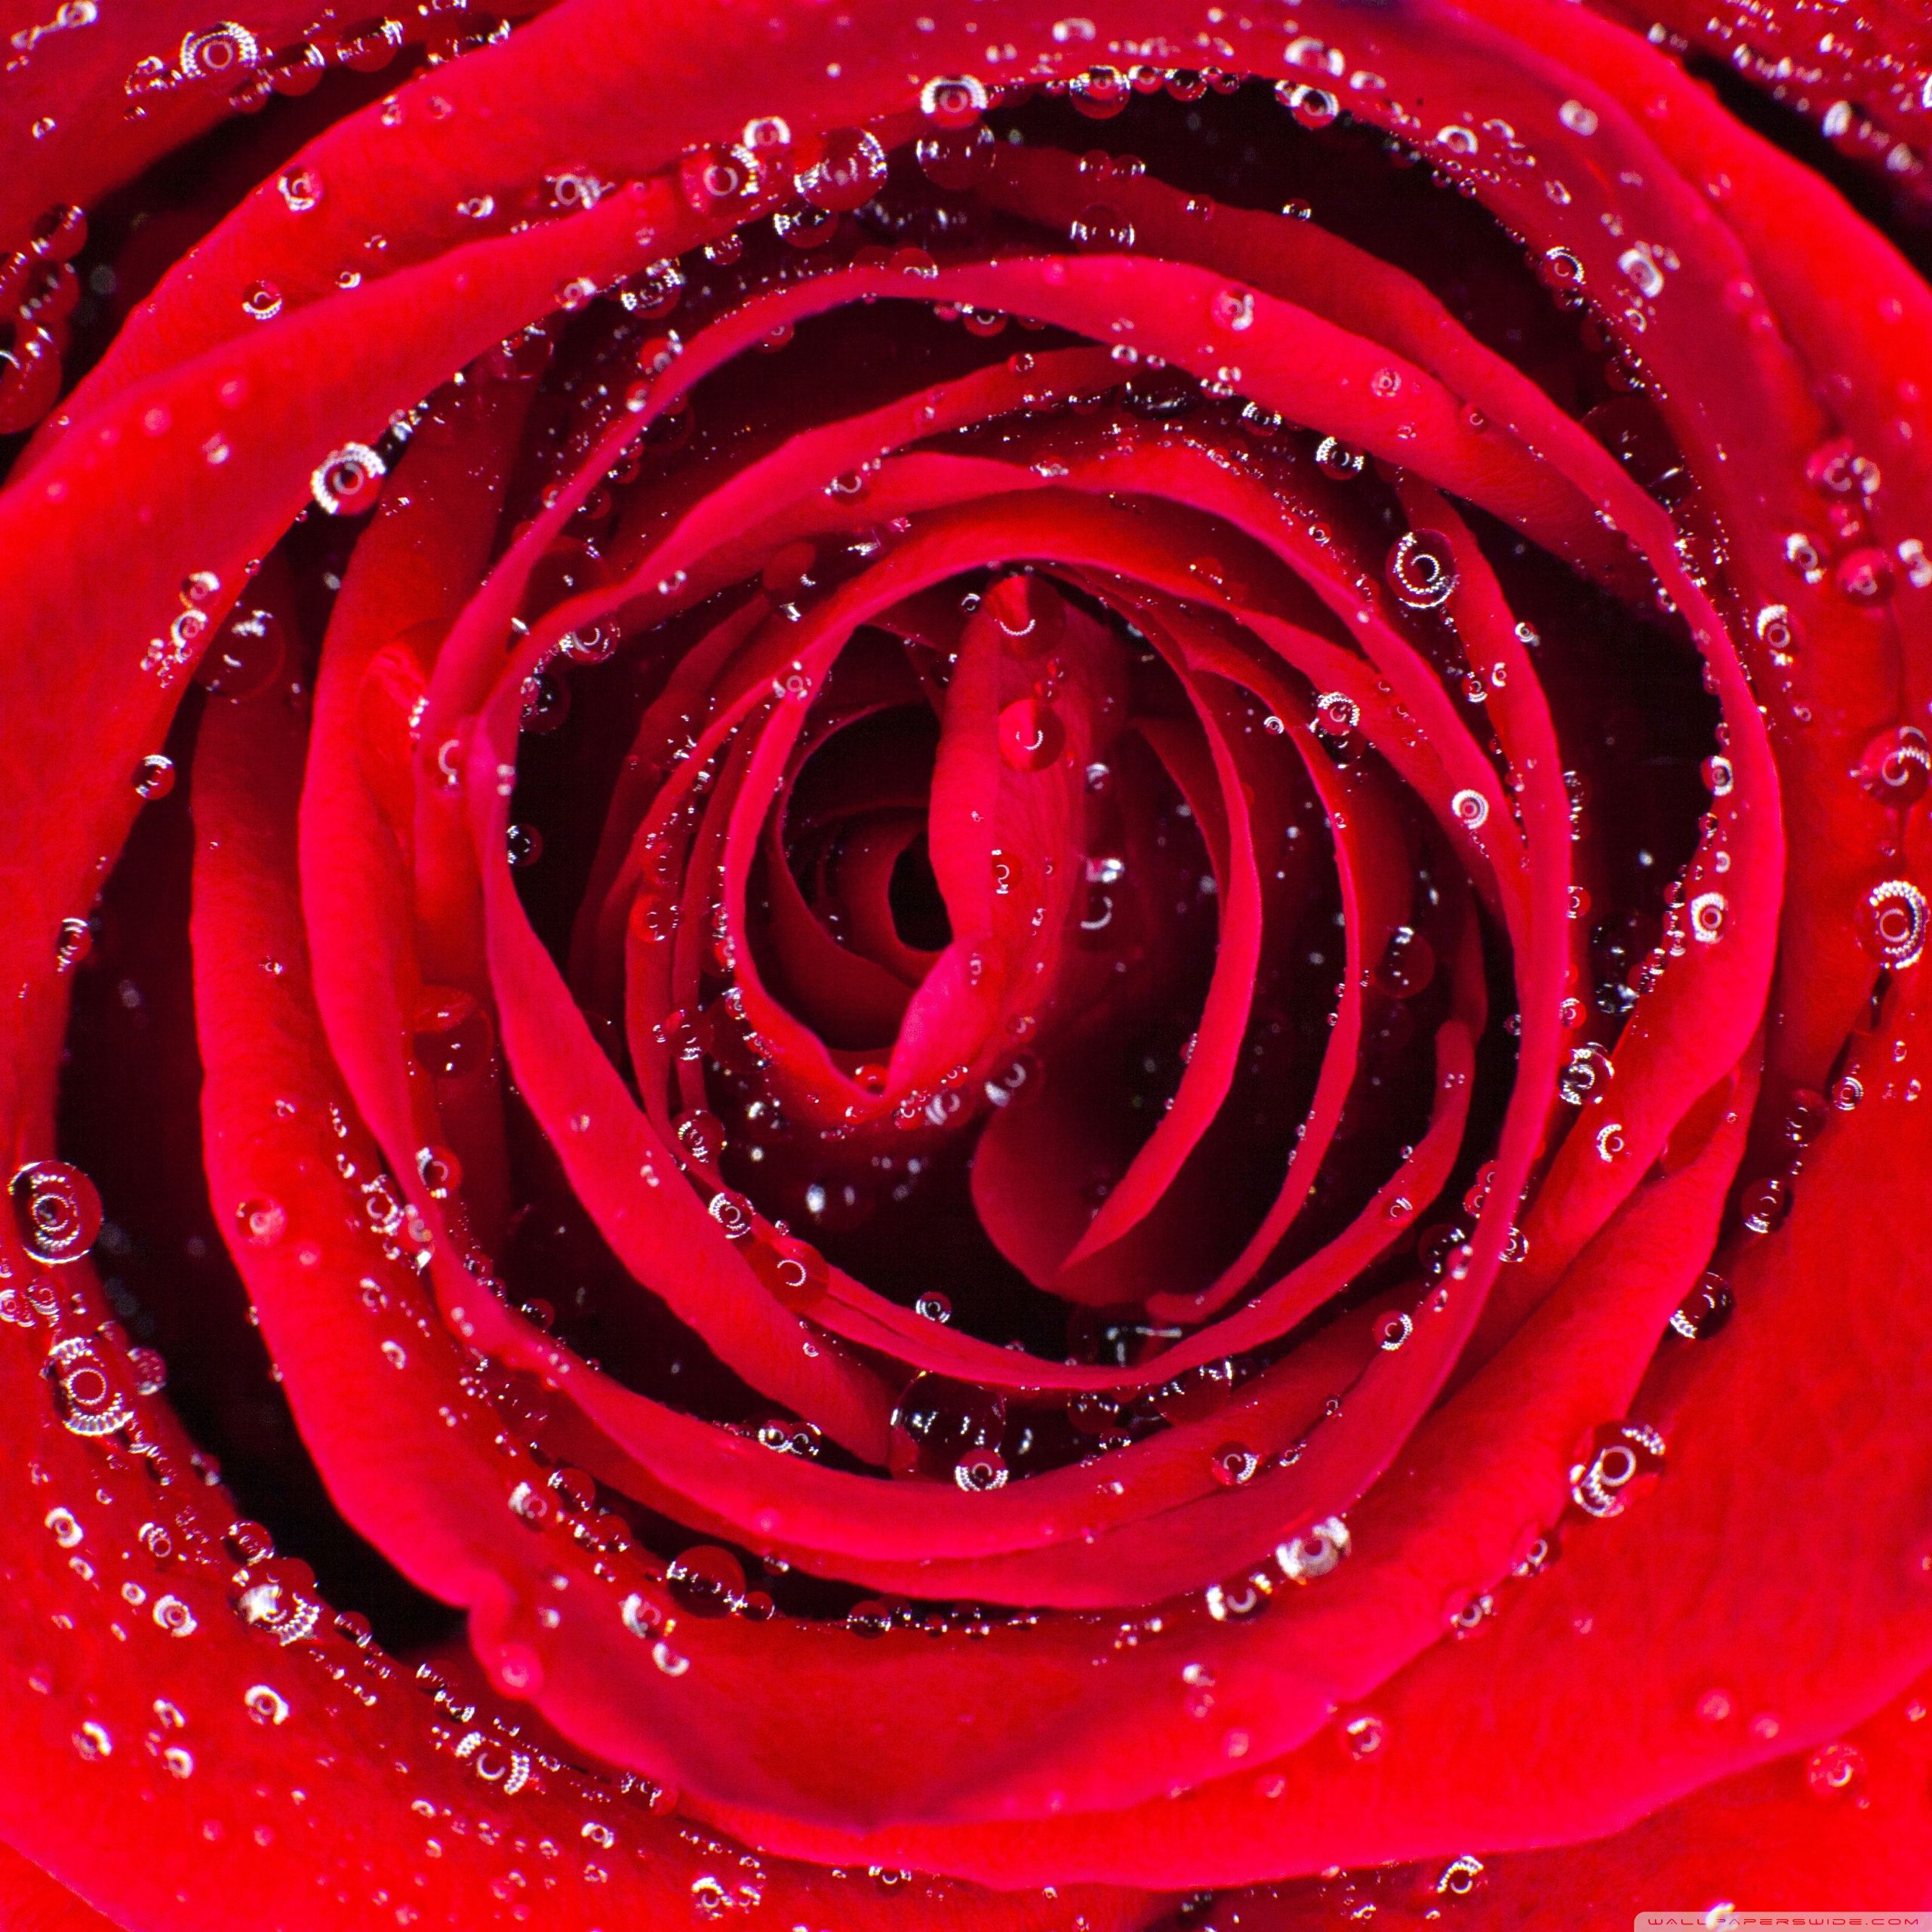 A red rose with water droplets on it - Macro, roses